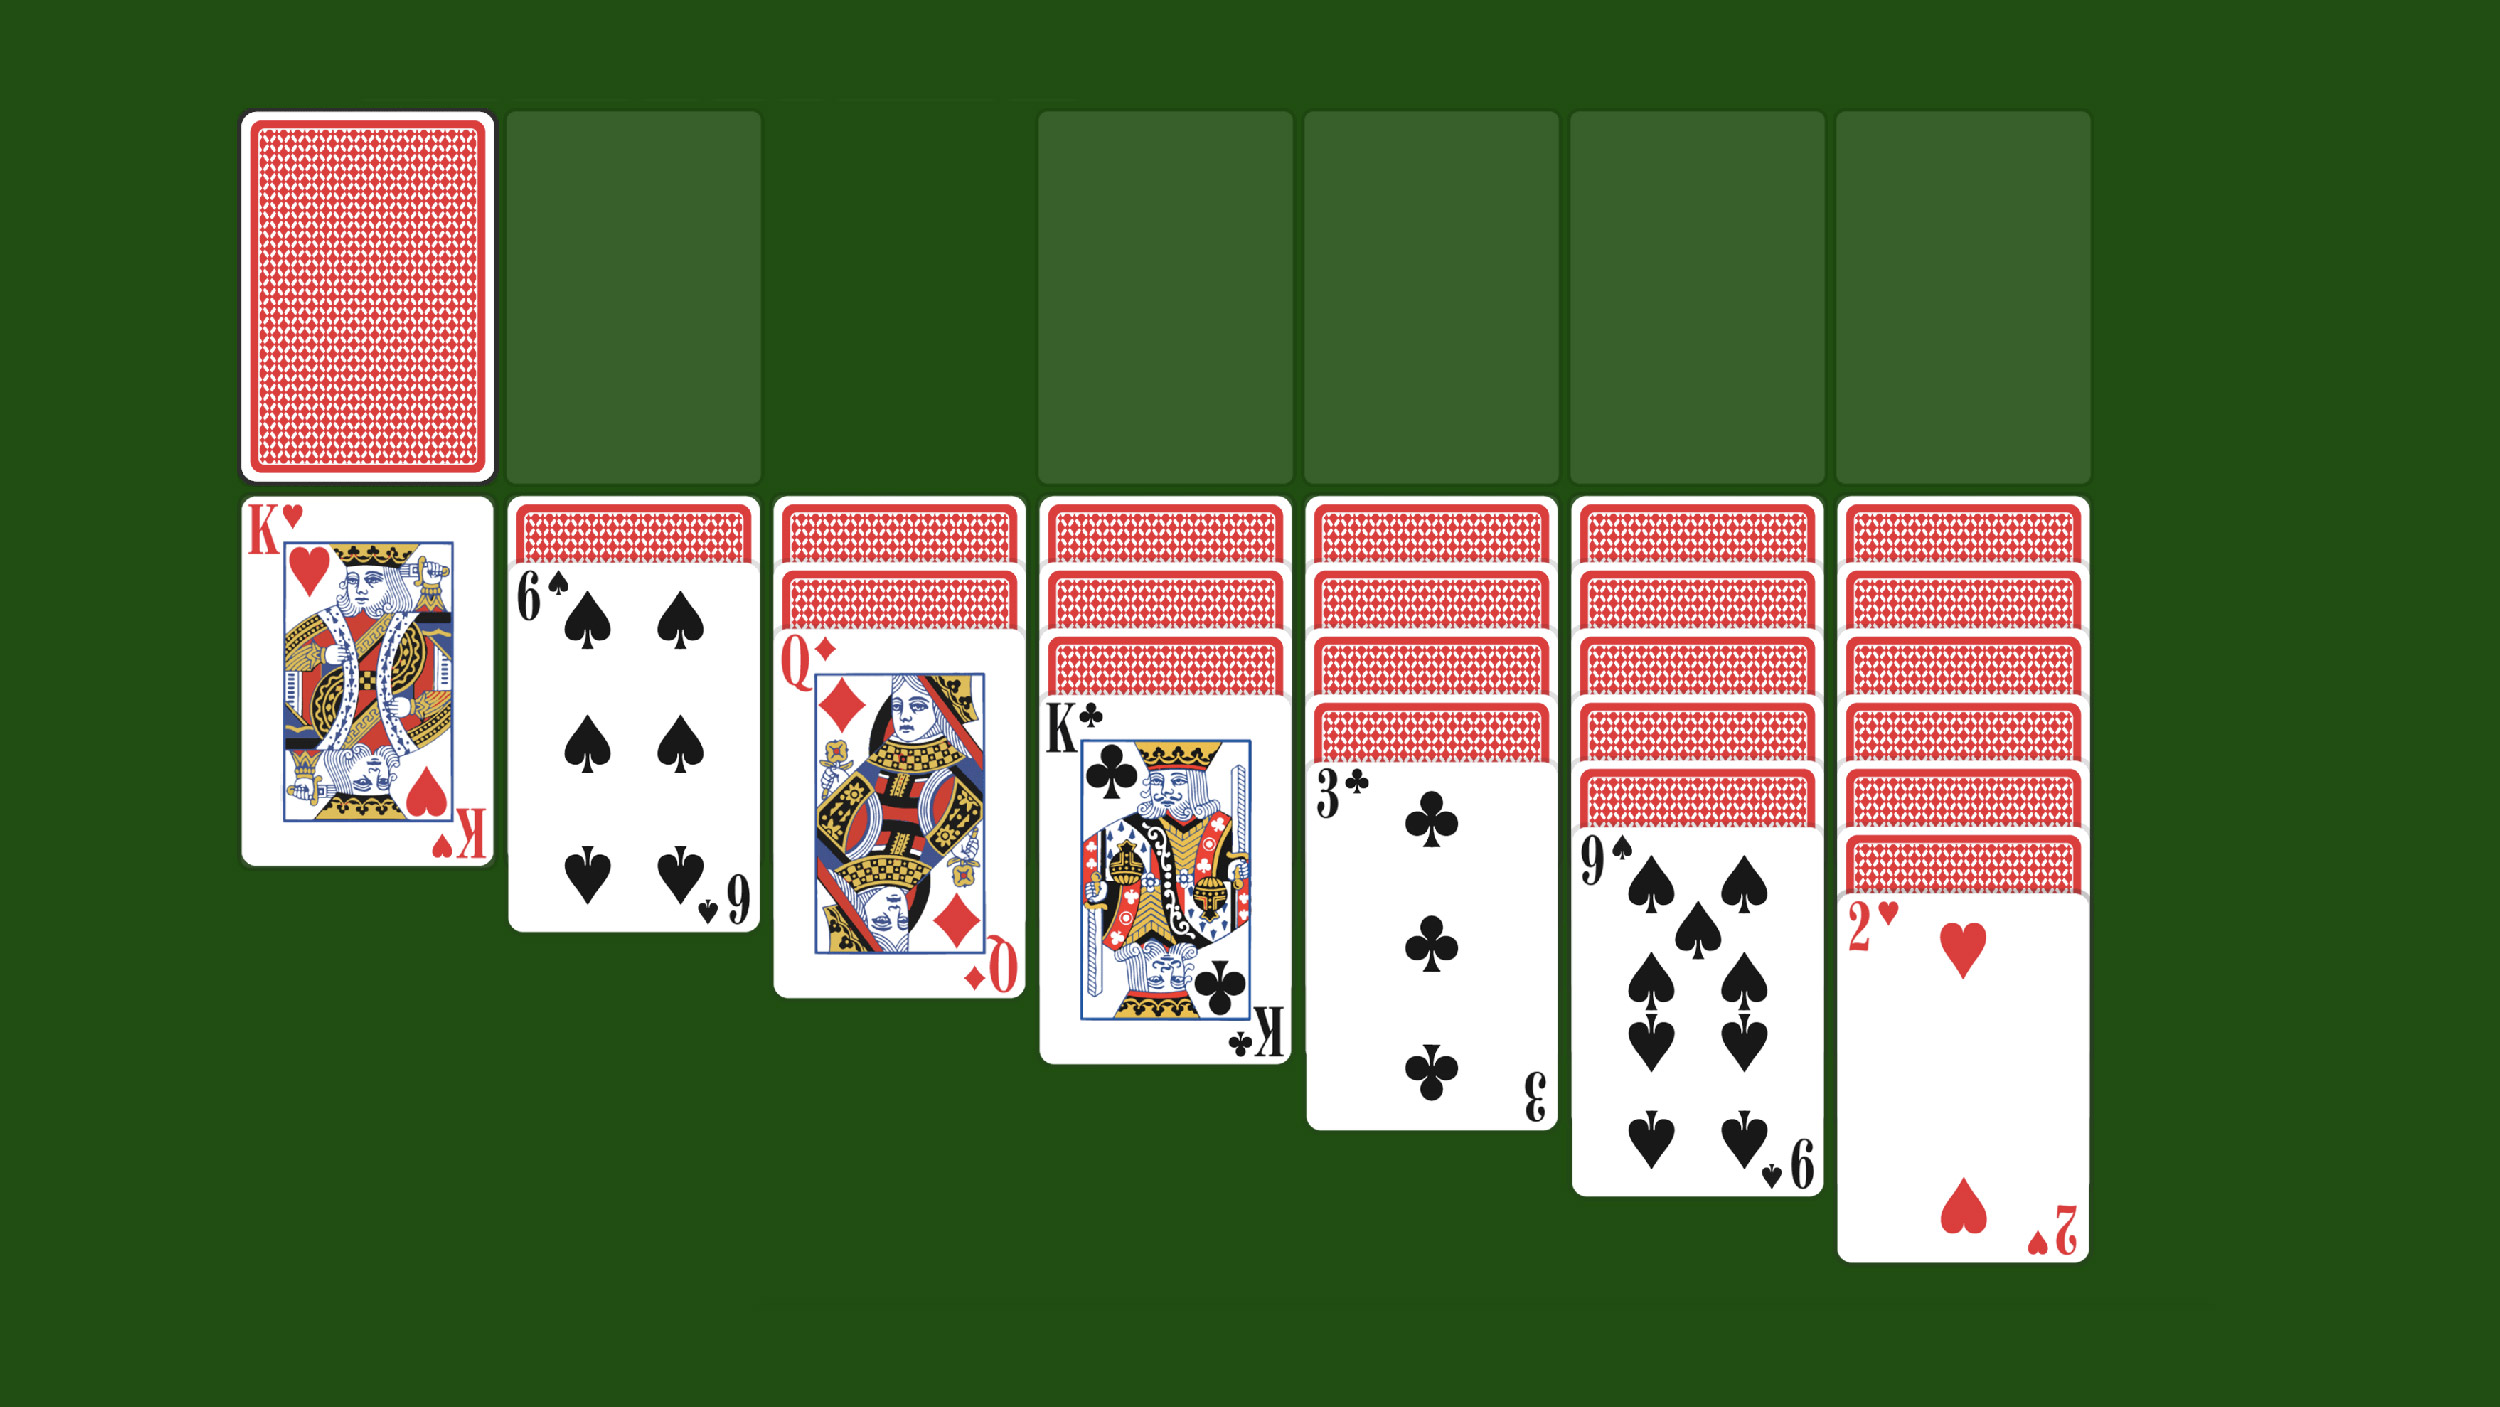 8 Different Types of Solitaire Games to Play